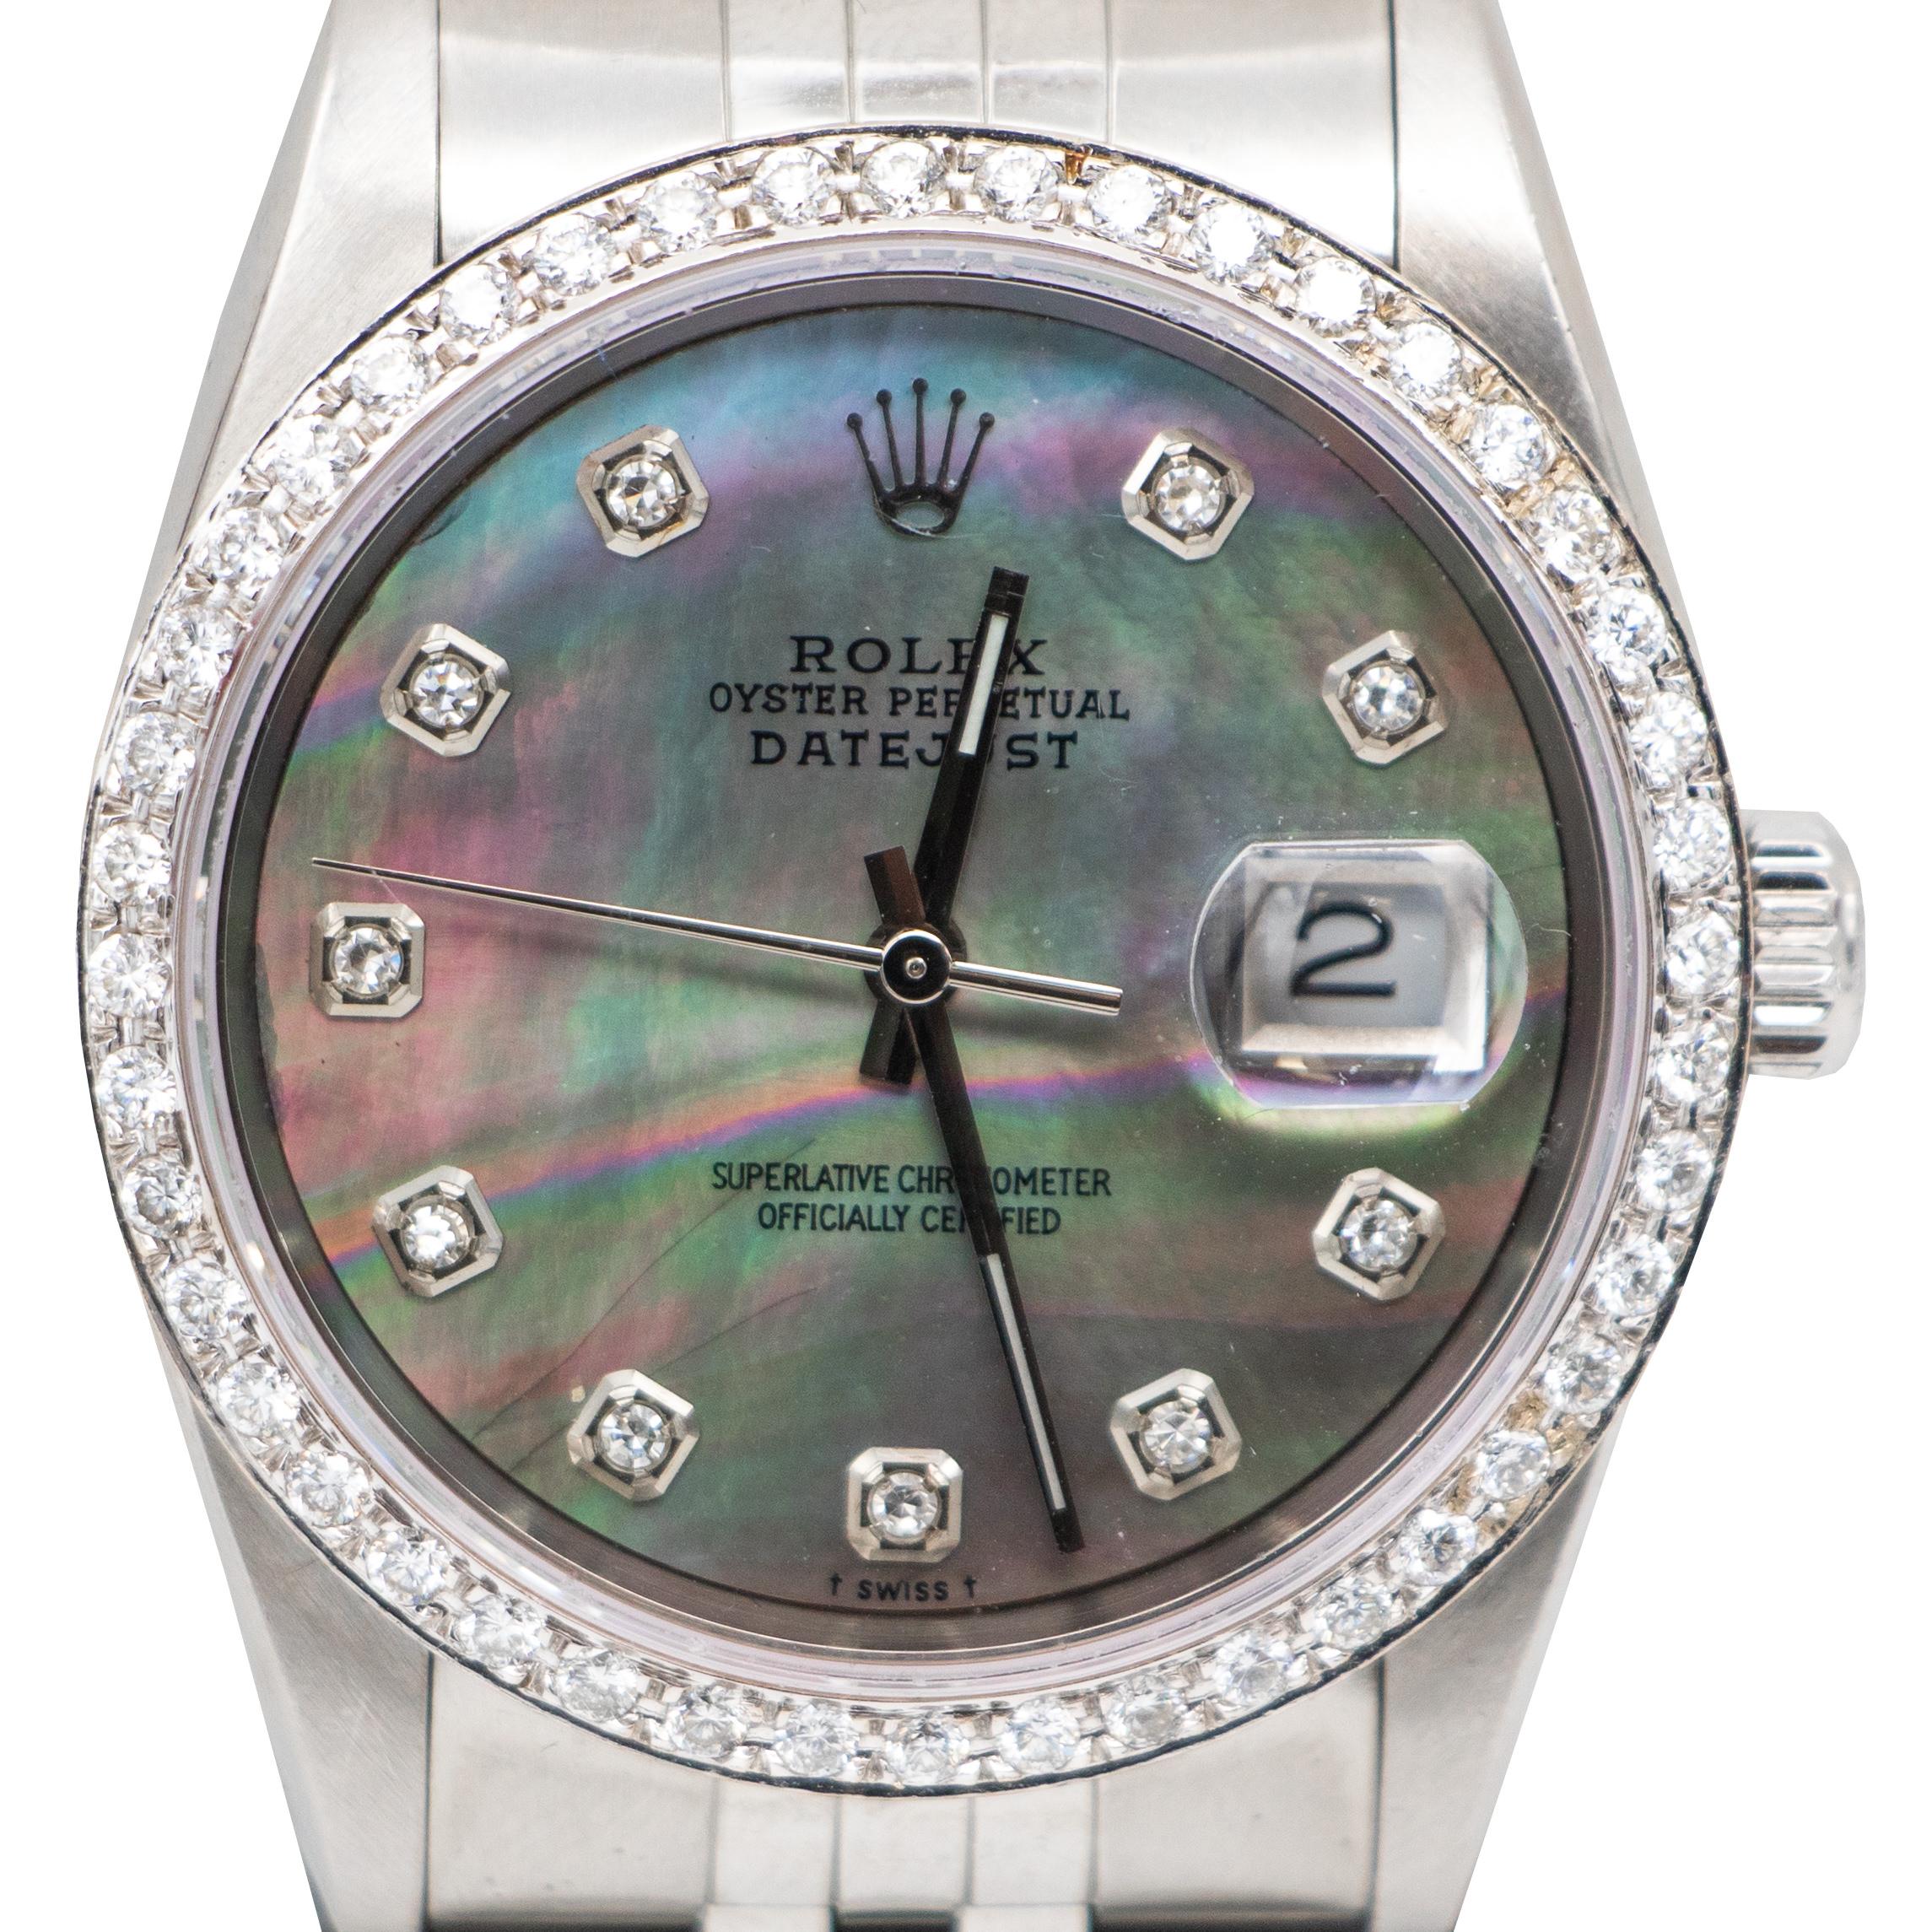 Brand: Rolex

Movement: T Swiss Made T Automatic Movement

Case Diameter: 36 mm

Waterproof to 100 Meters / 330 Feet

Dial: 10 Diamonds With The Rolex Crown Logo At The 12 O'clock Position, 18K White Gold Hour Markers

Bezel Set With 44 Factory